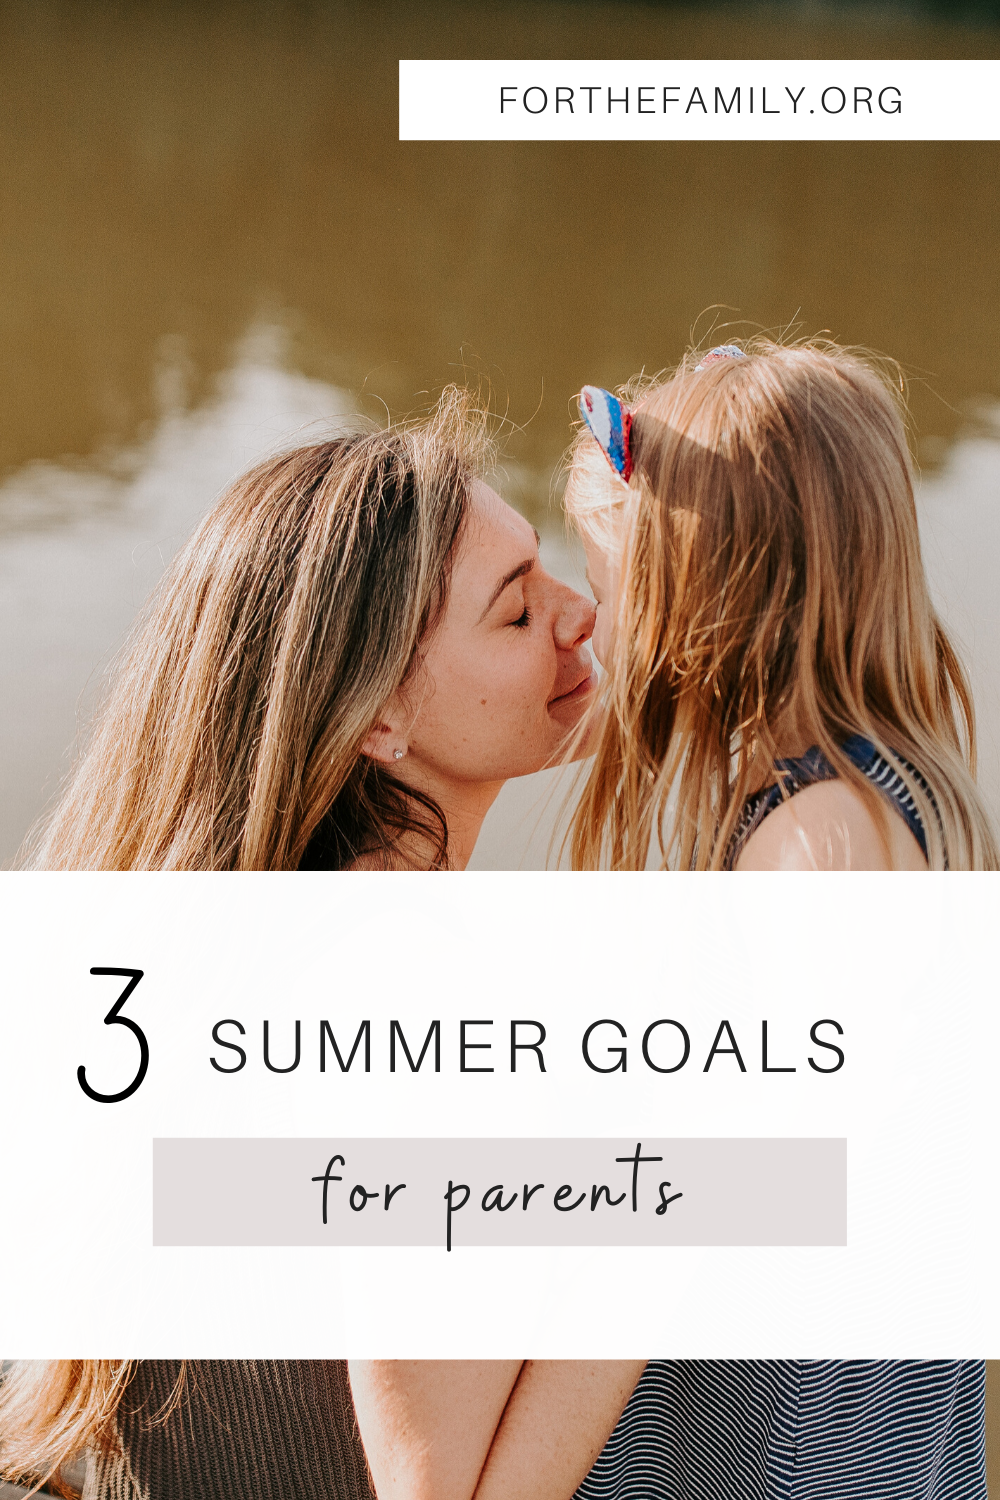 As our kids make personal goals to have the most fun this summer, parents need to be reminded that it’s their summer too! Here are three things you can consider adding to your summer routine!